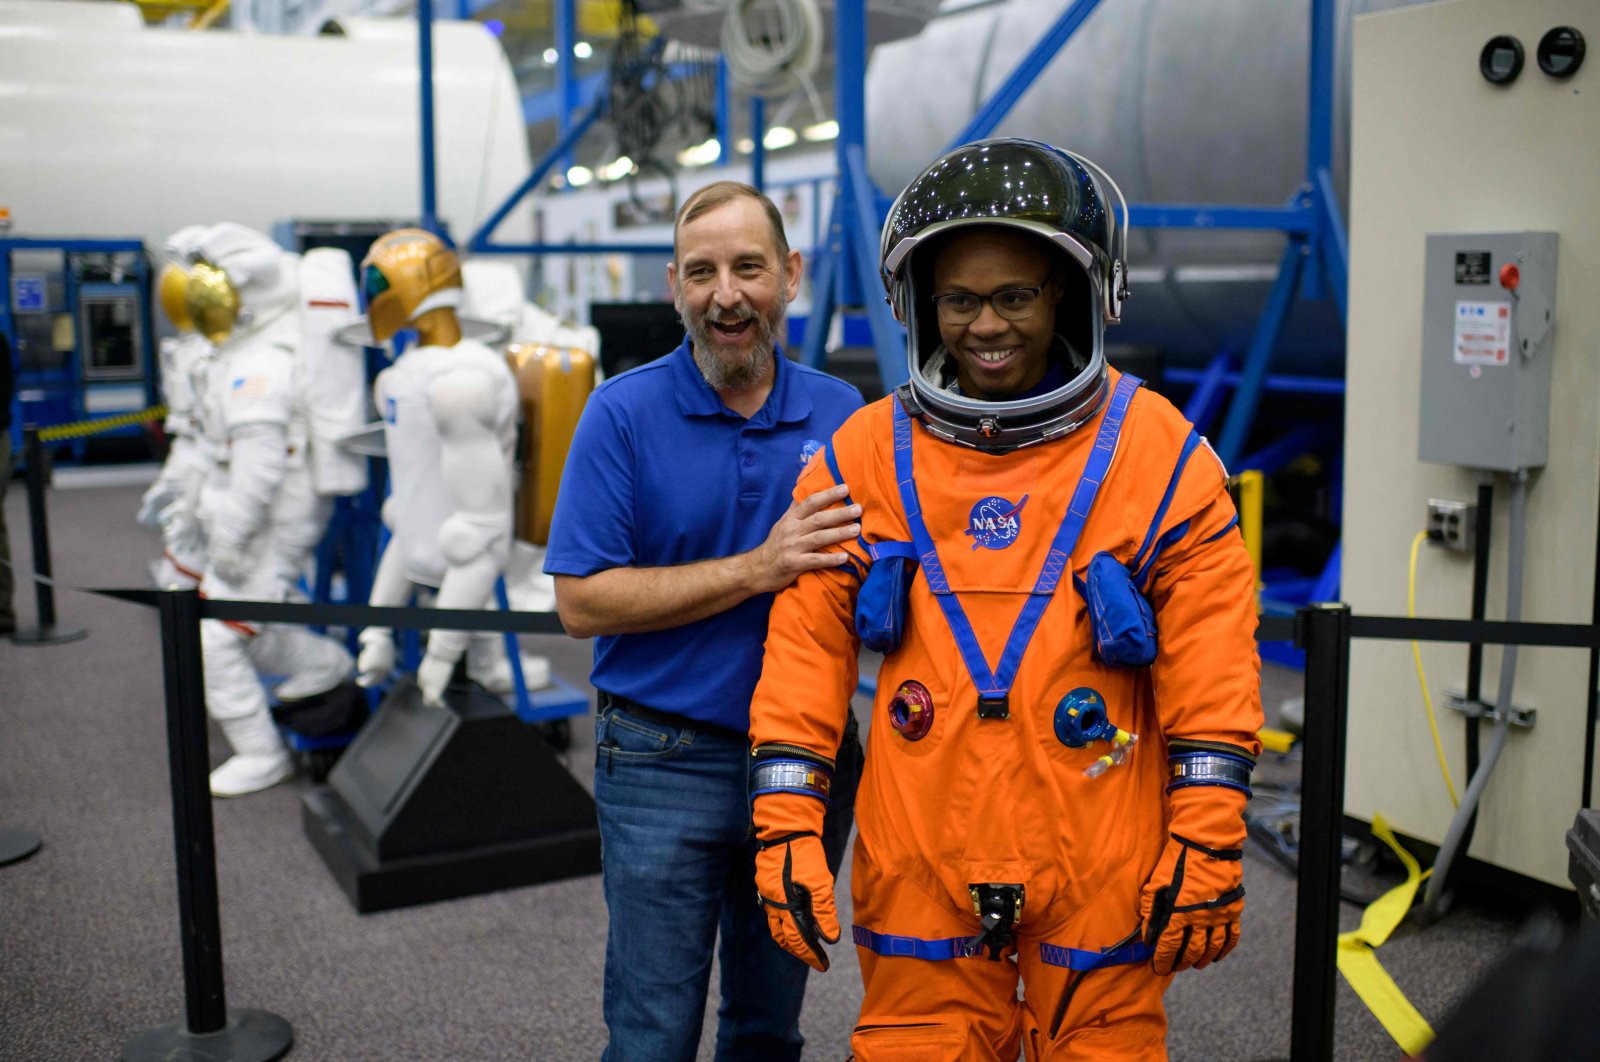 Suit technicians Bill Owens (L) and Henry Phillips laugh while showing off a spacesuit at the Johnson Space Center’s Space Vehicle Mock-up Facility in Houston, Texas, U.S., Aug. 5, 2022. (AFP Photo)